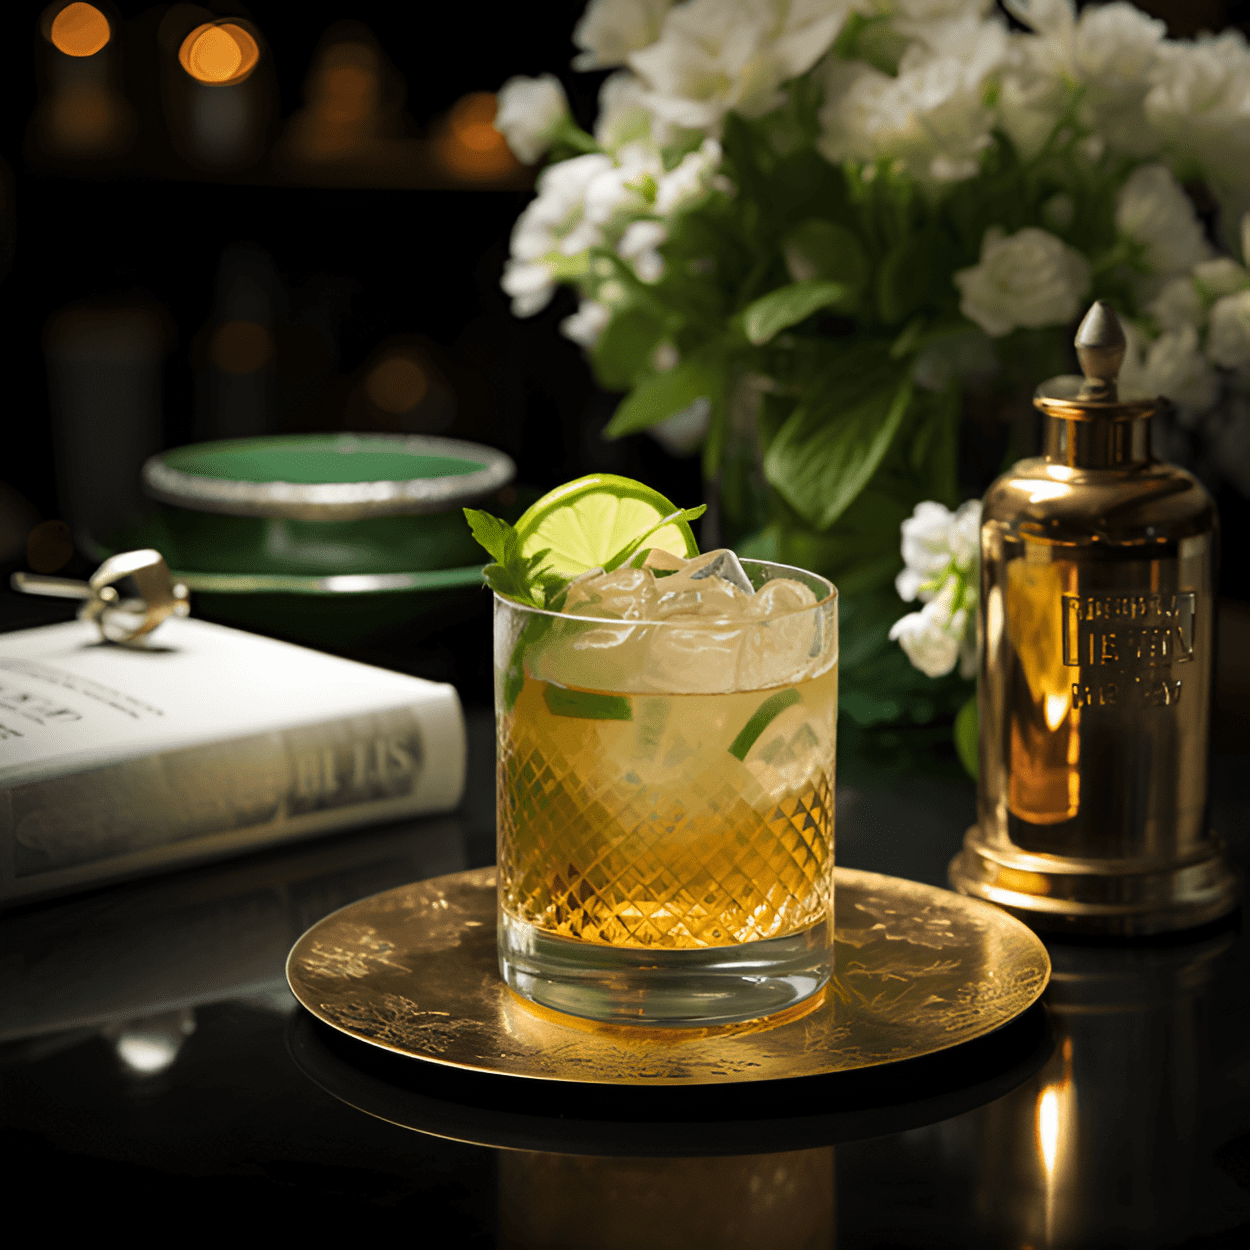 Tea Cocktail Recipe - The Tea cocktail offers a delicate balance of flavors, with the earthy and aromatic notes of tea mingling with the sweet and tangy taste of citrus. It has a light and refreshing body, with a subtle hint of alcohol that adds warmth and complexity.